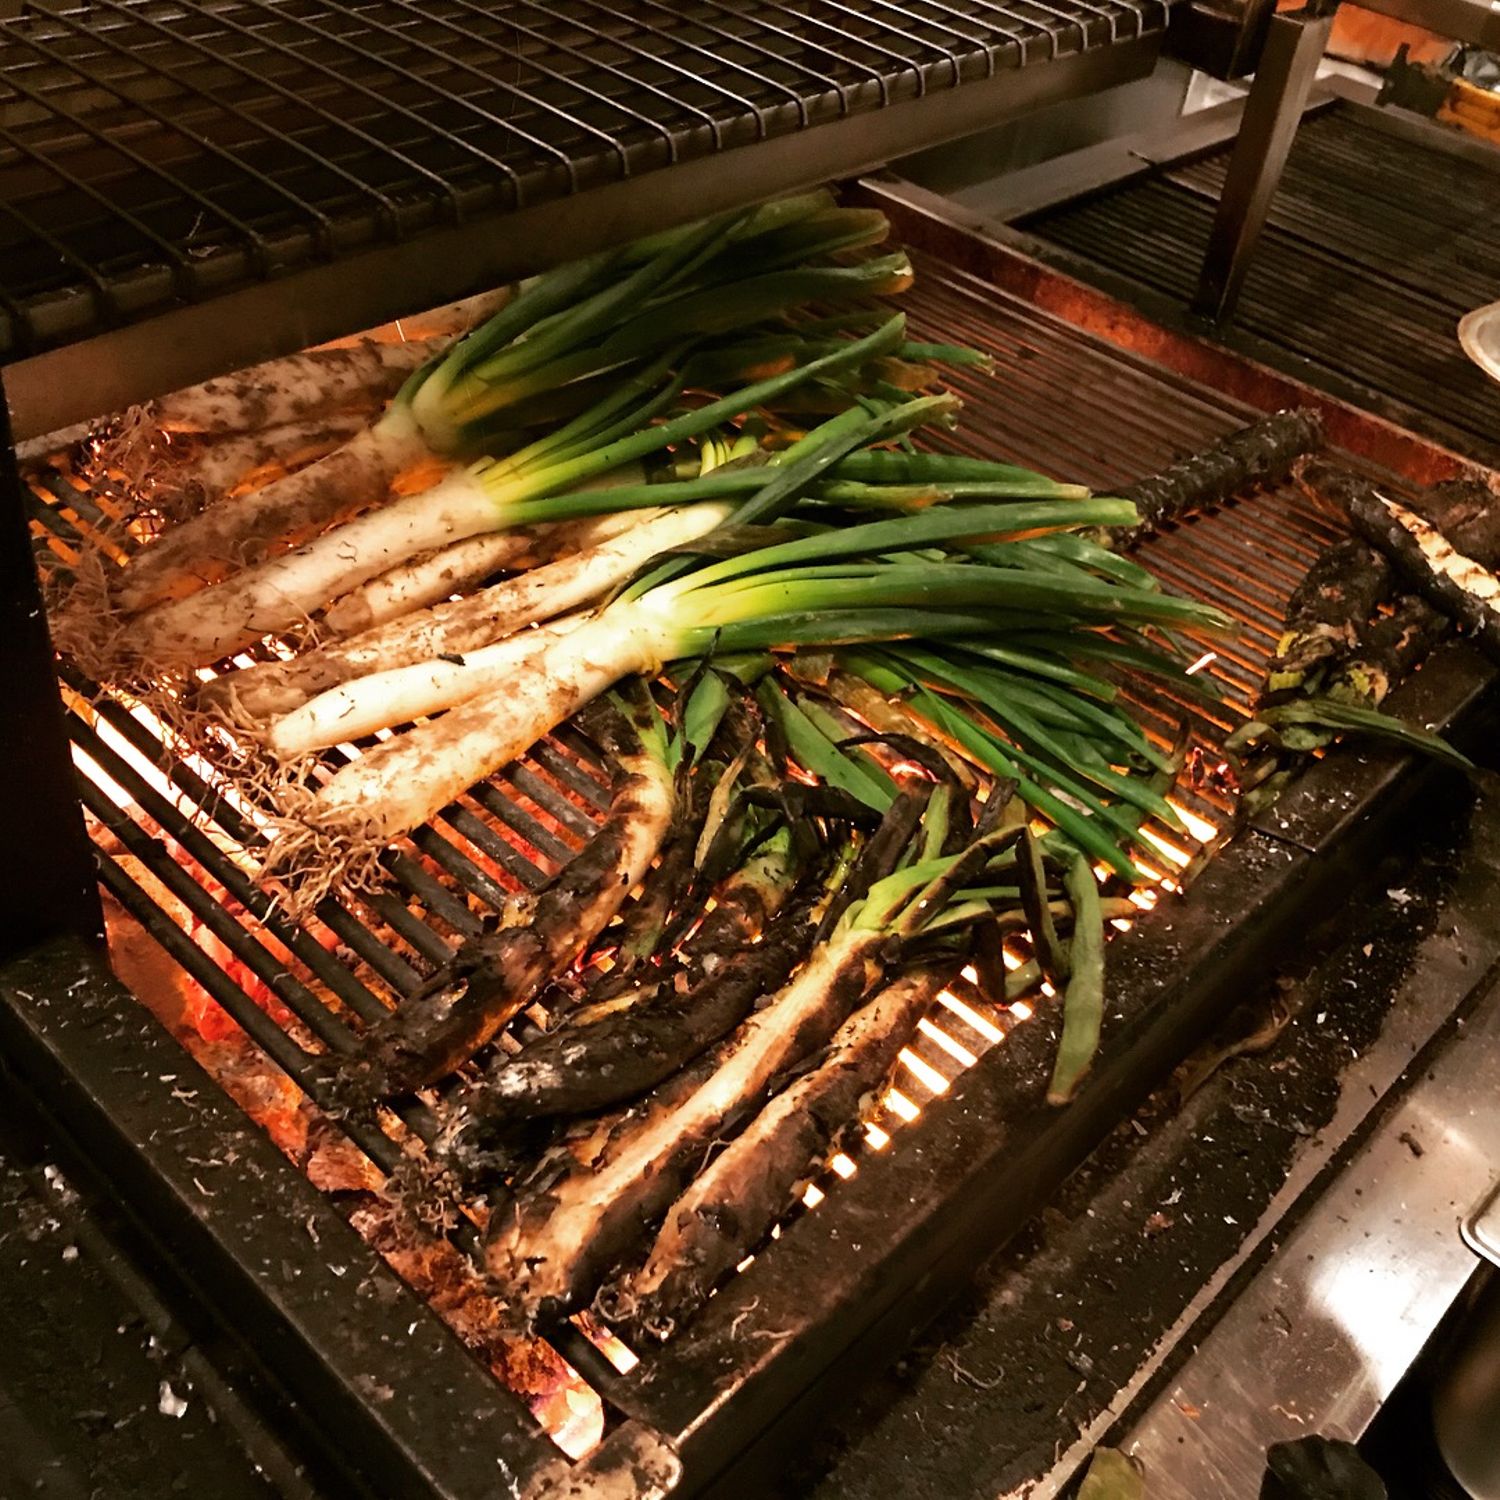 Calcots being cooked on asado grill at Asador 44 Cardiff